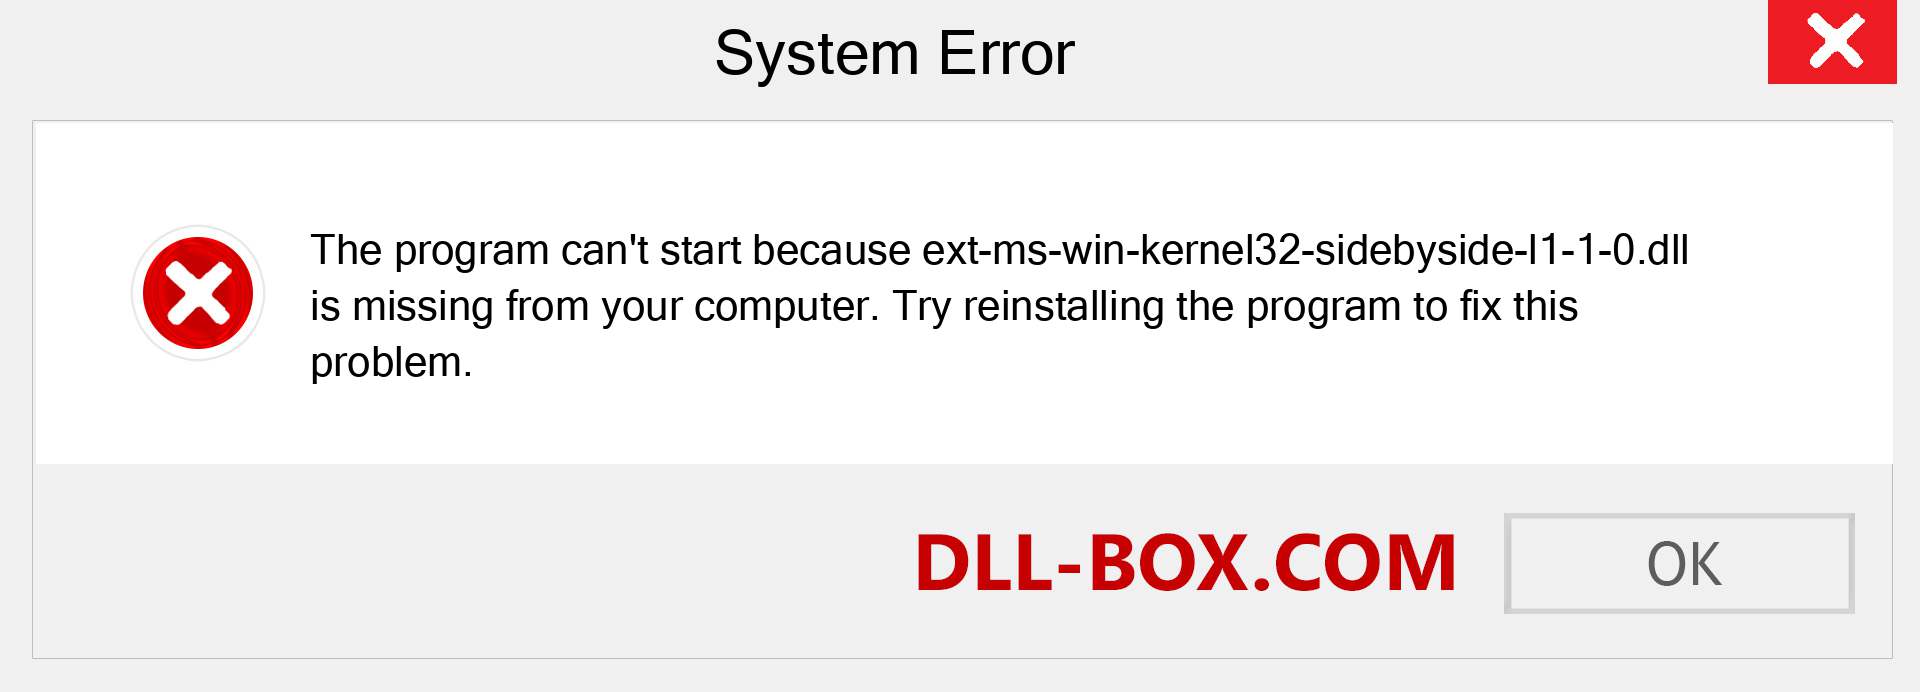  ext-ms-win-kernel32-sidebyside-l1-1-0.dll file is missing?. Download for Windows 7, 8, 10 - Fix  ext-ms-win-kernel32-sidebyside-l1-1-0 dll Missing Error on Windows, photos, images